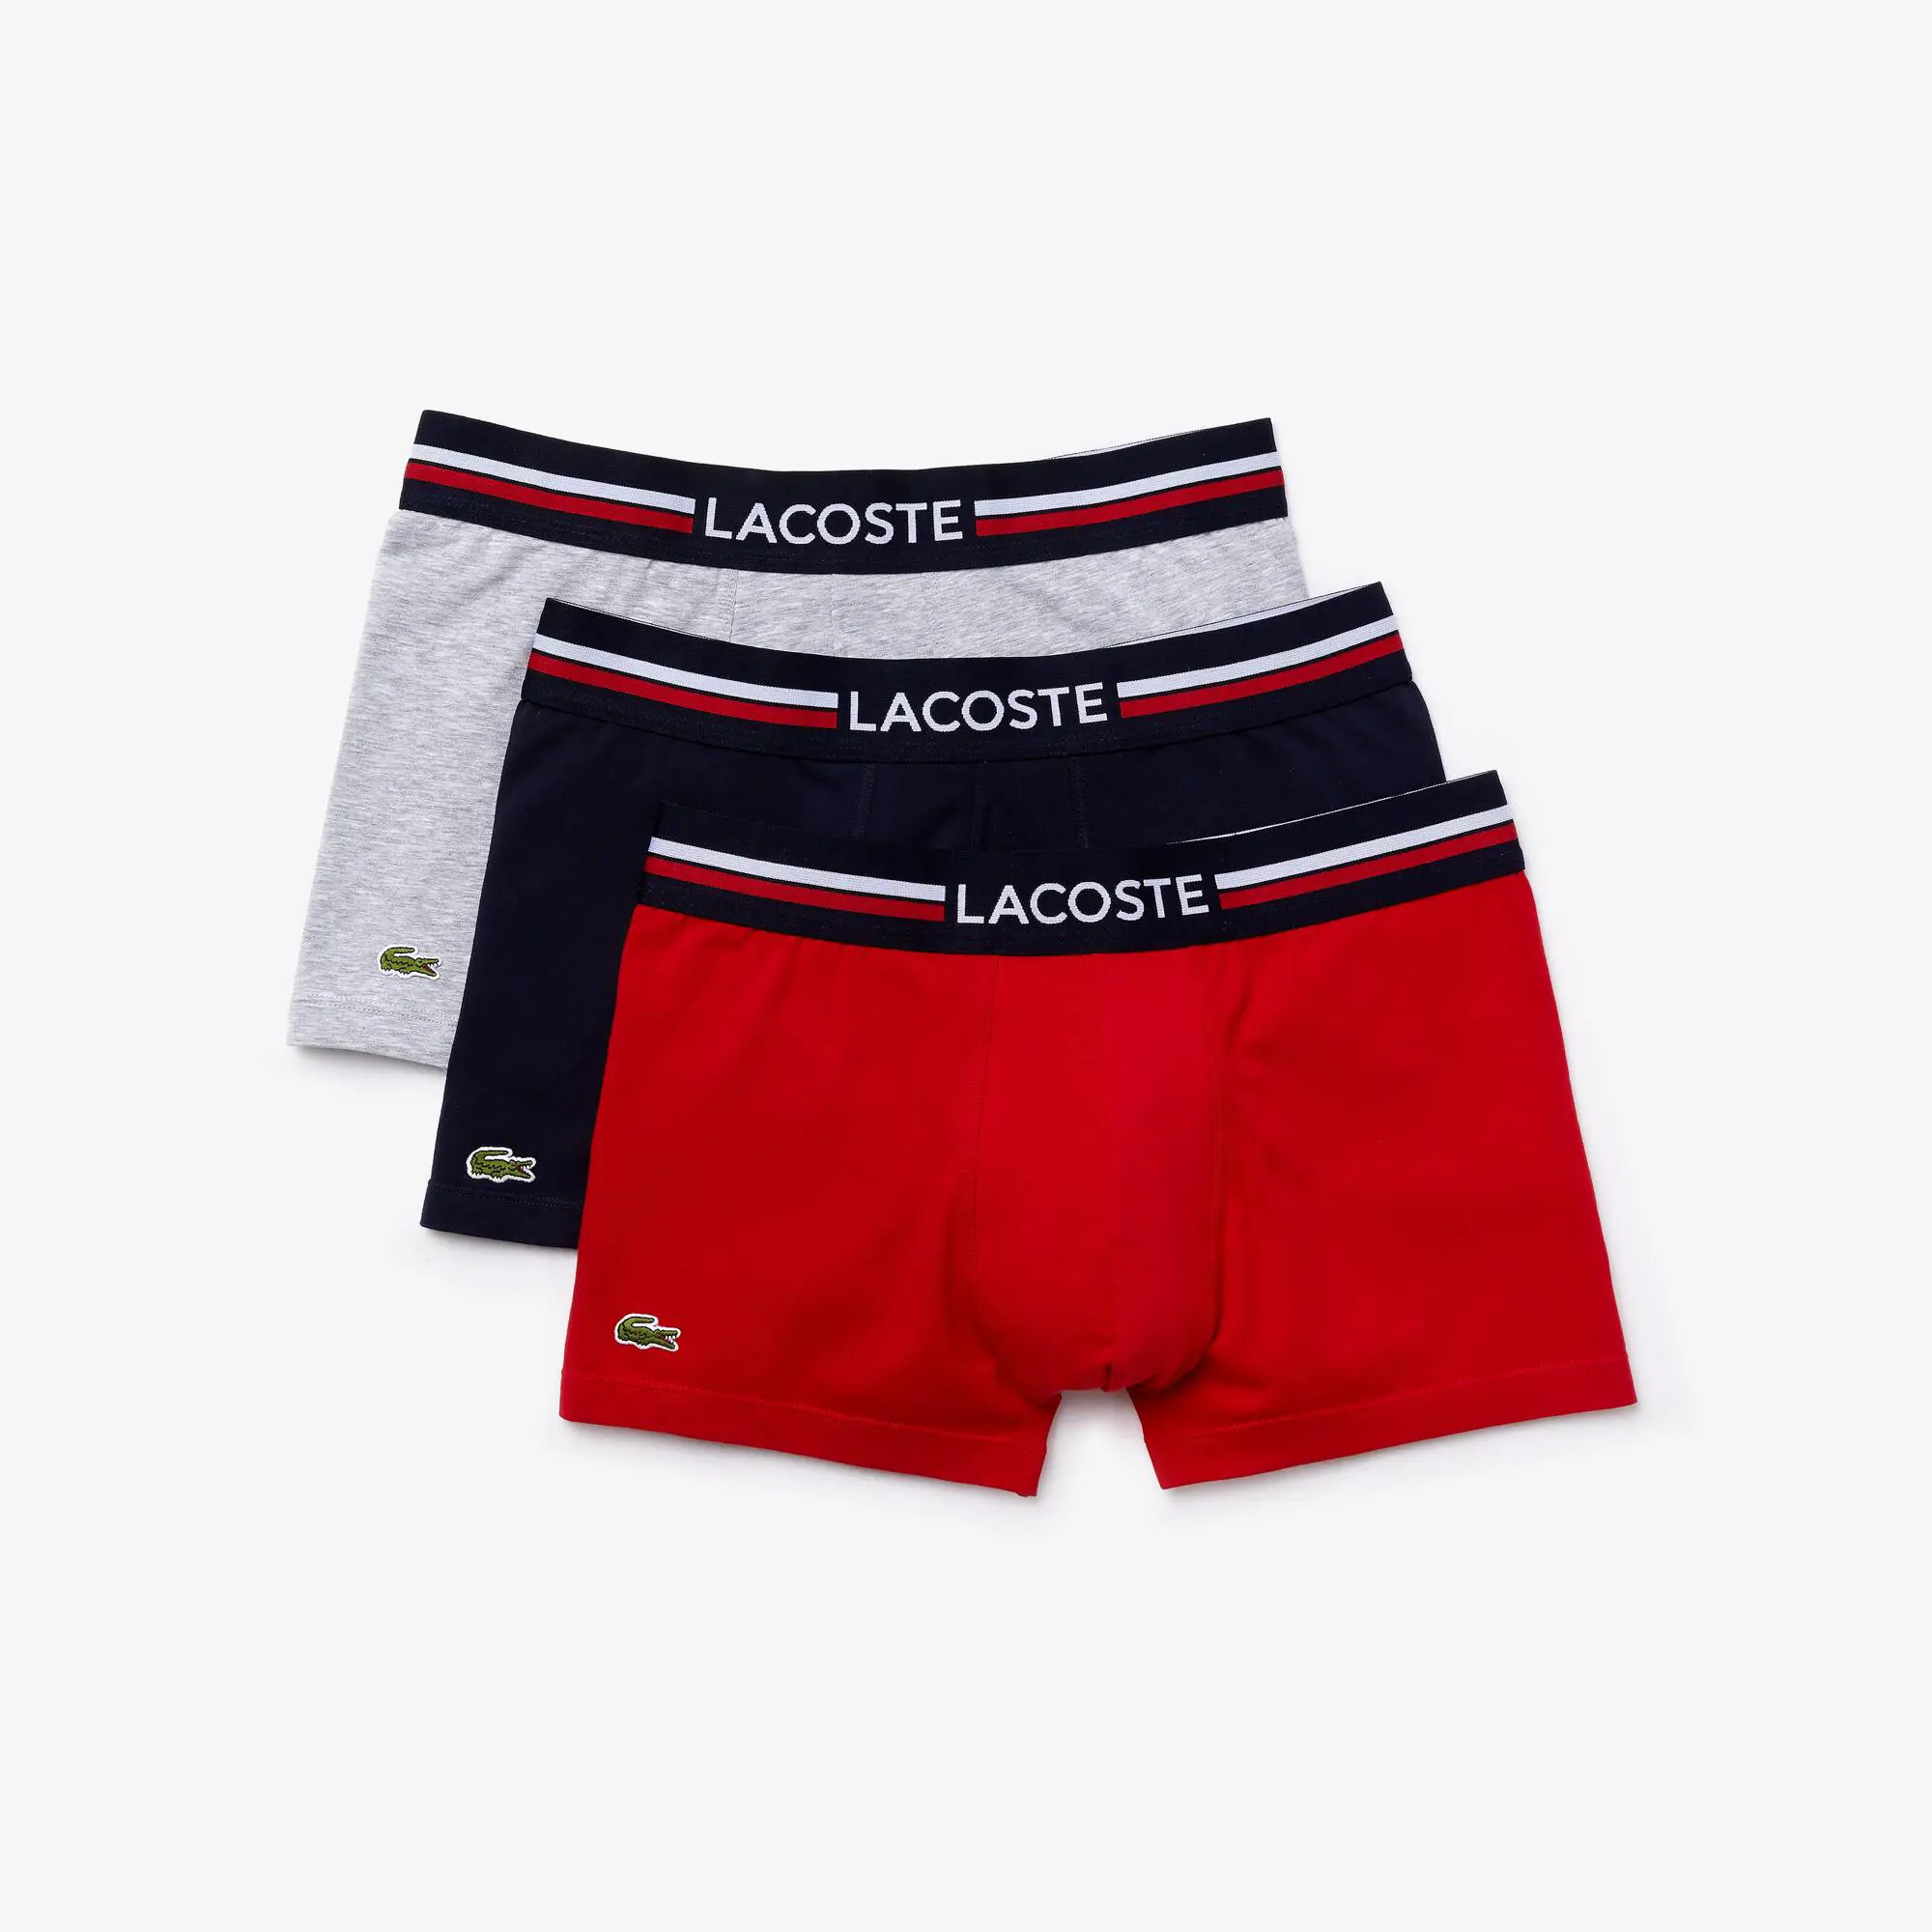 Lacoste Pack Of 3 Iconic Trunks With Three-Tone Waistband. 2